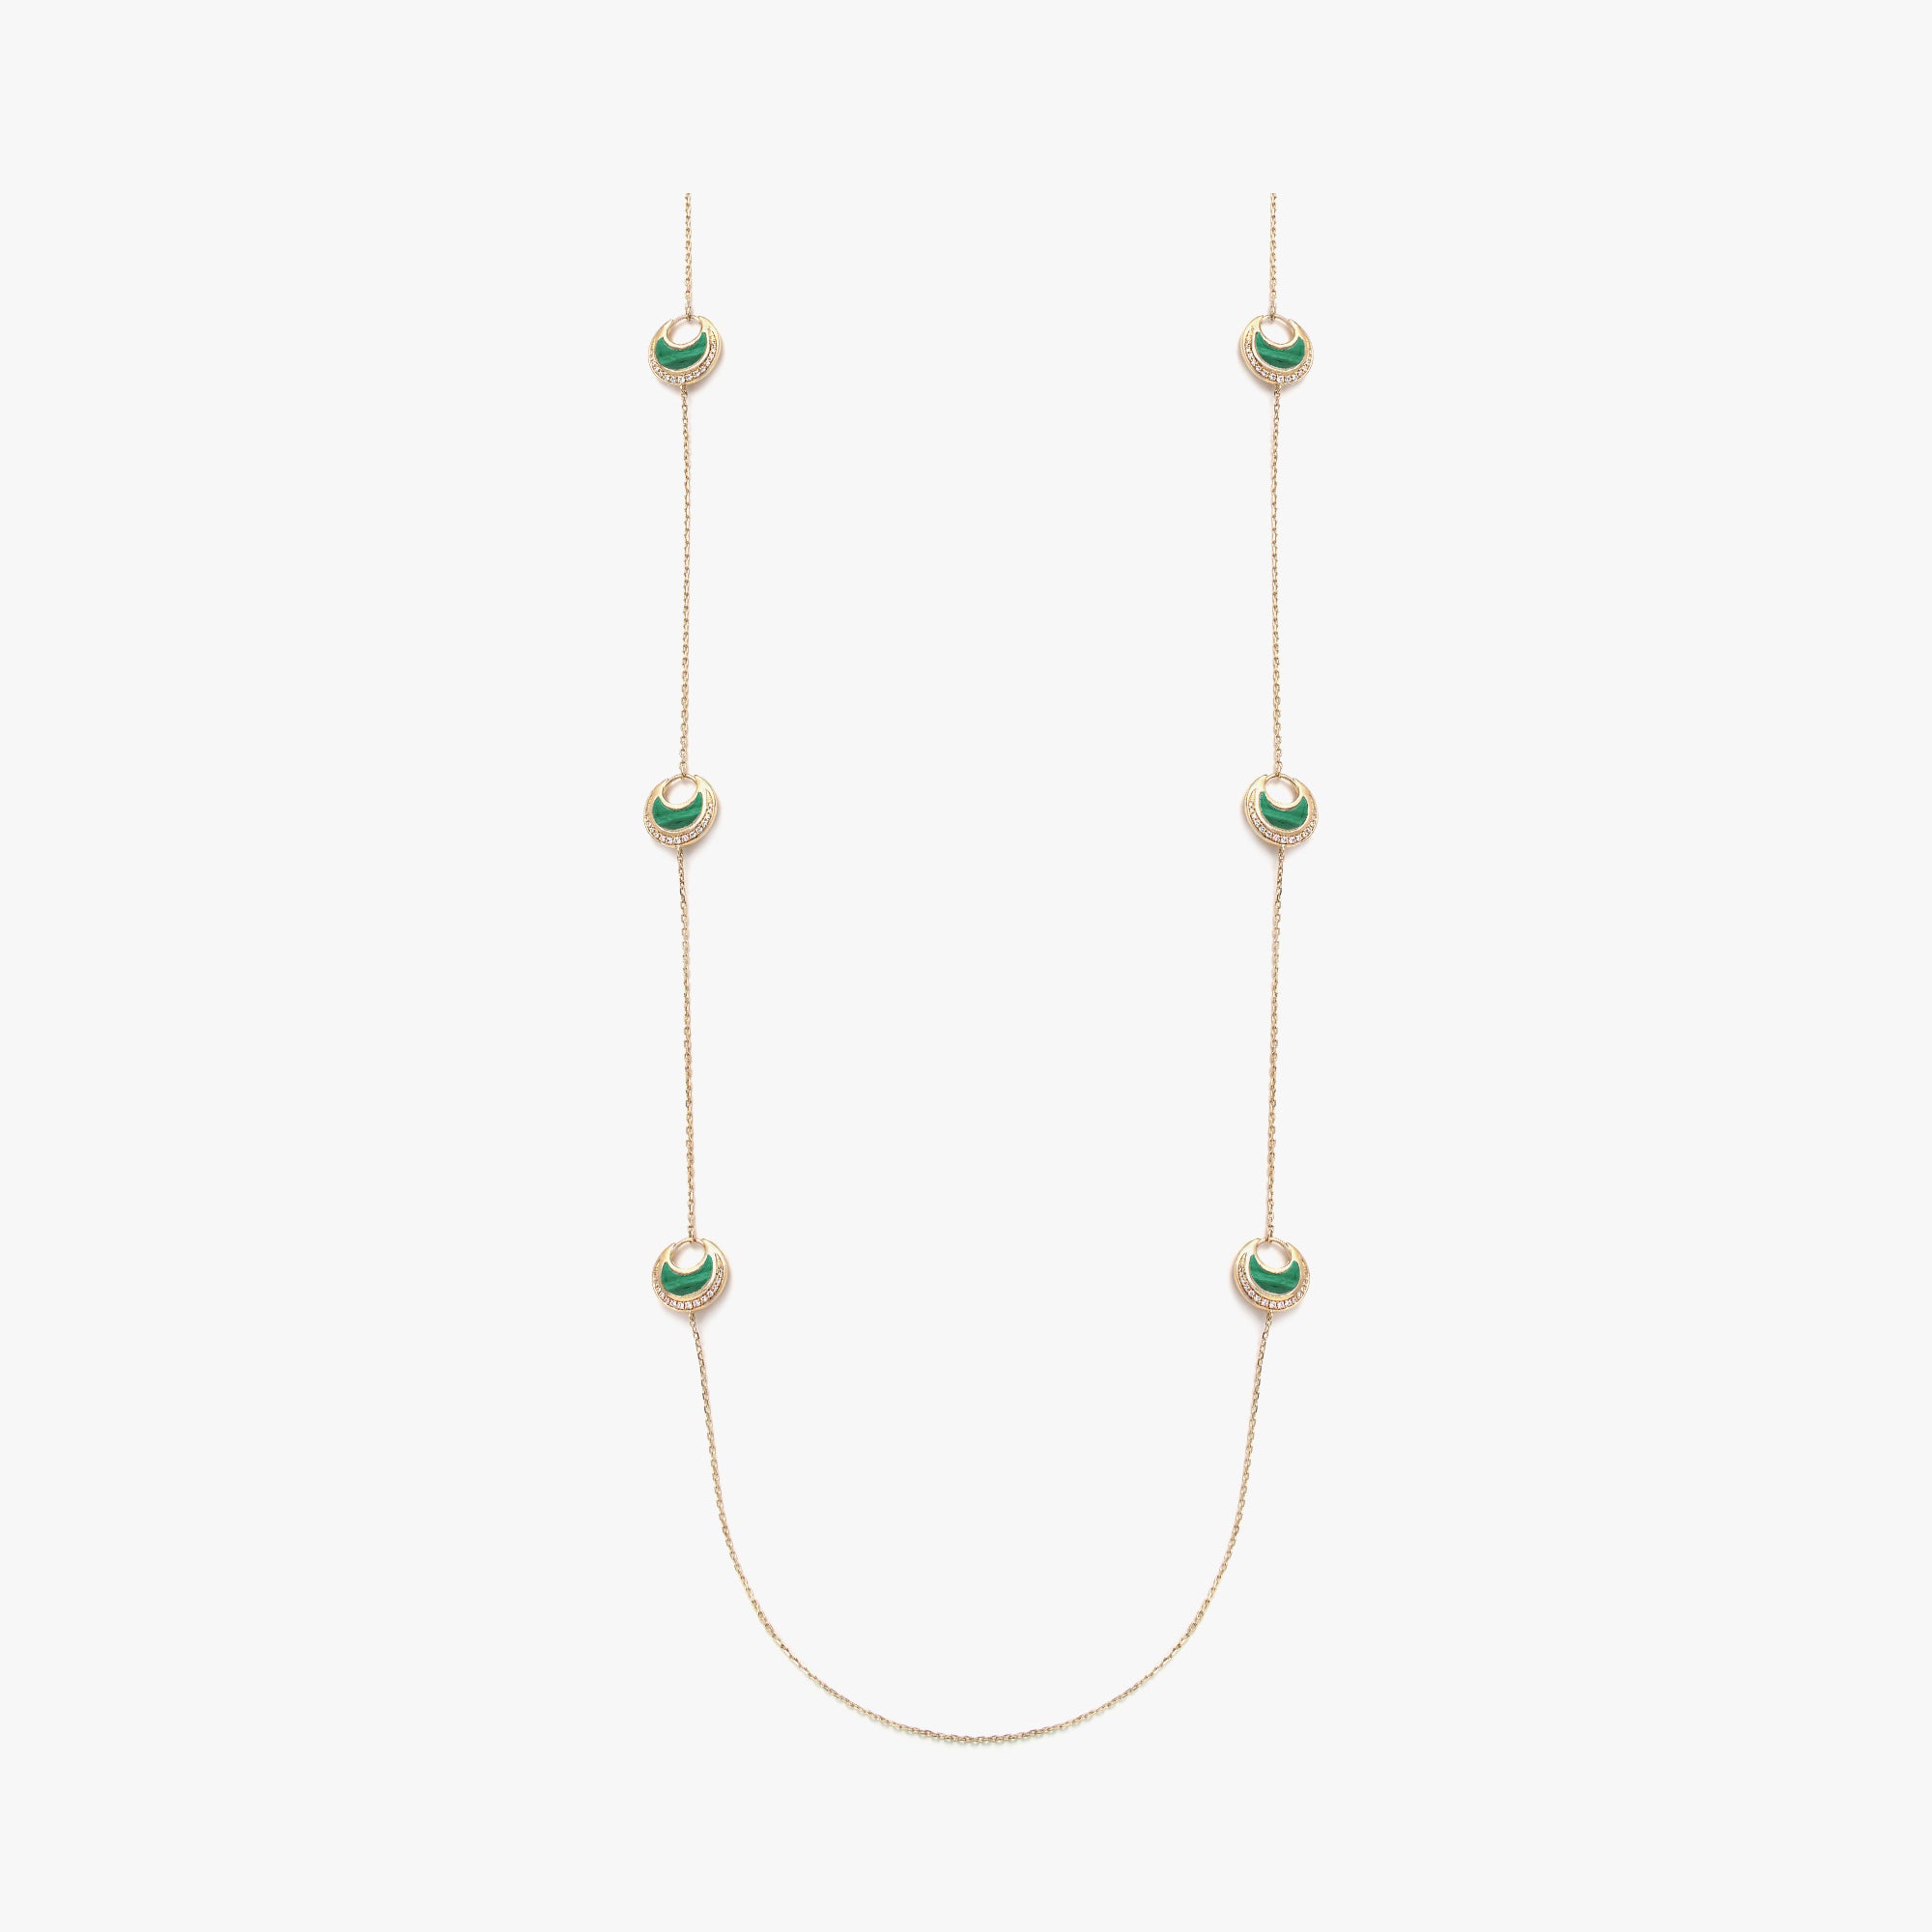 Al Hilal necklace in yellow gold with Malachite stones and diamonds